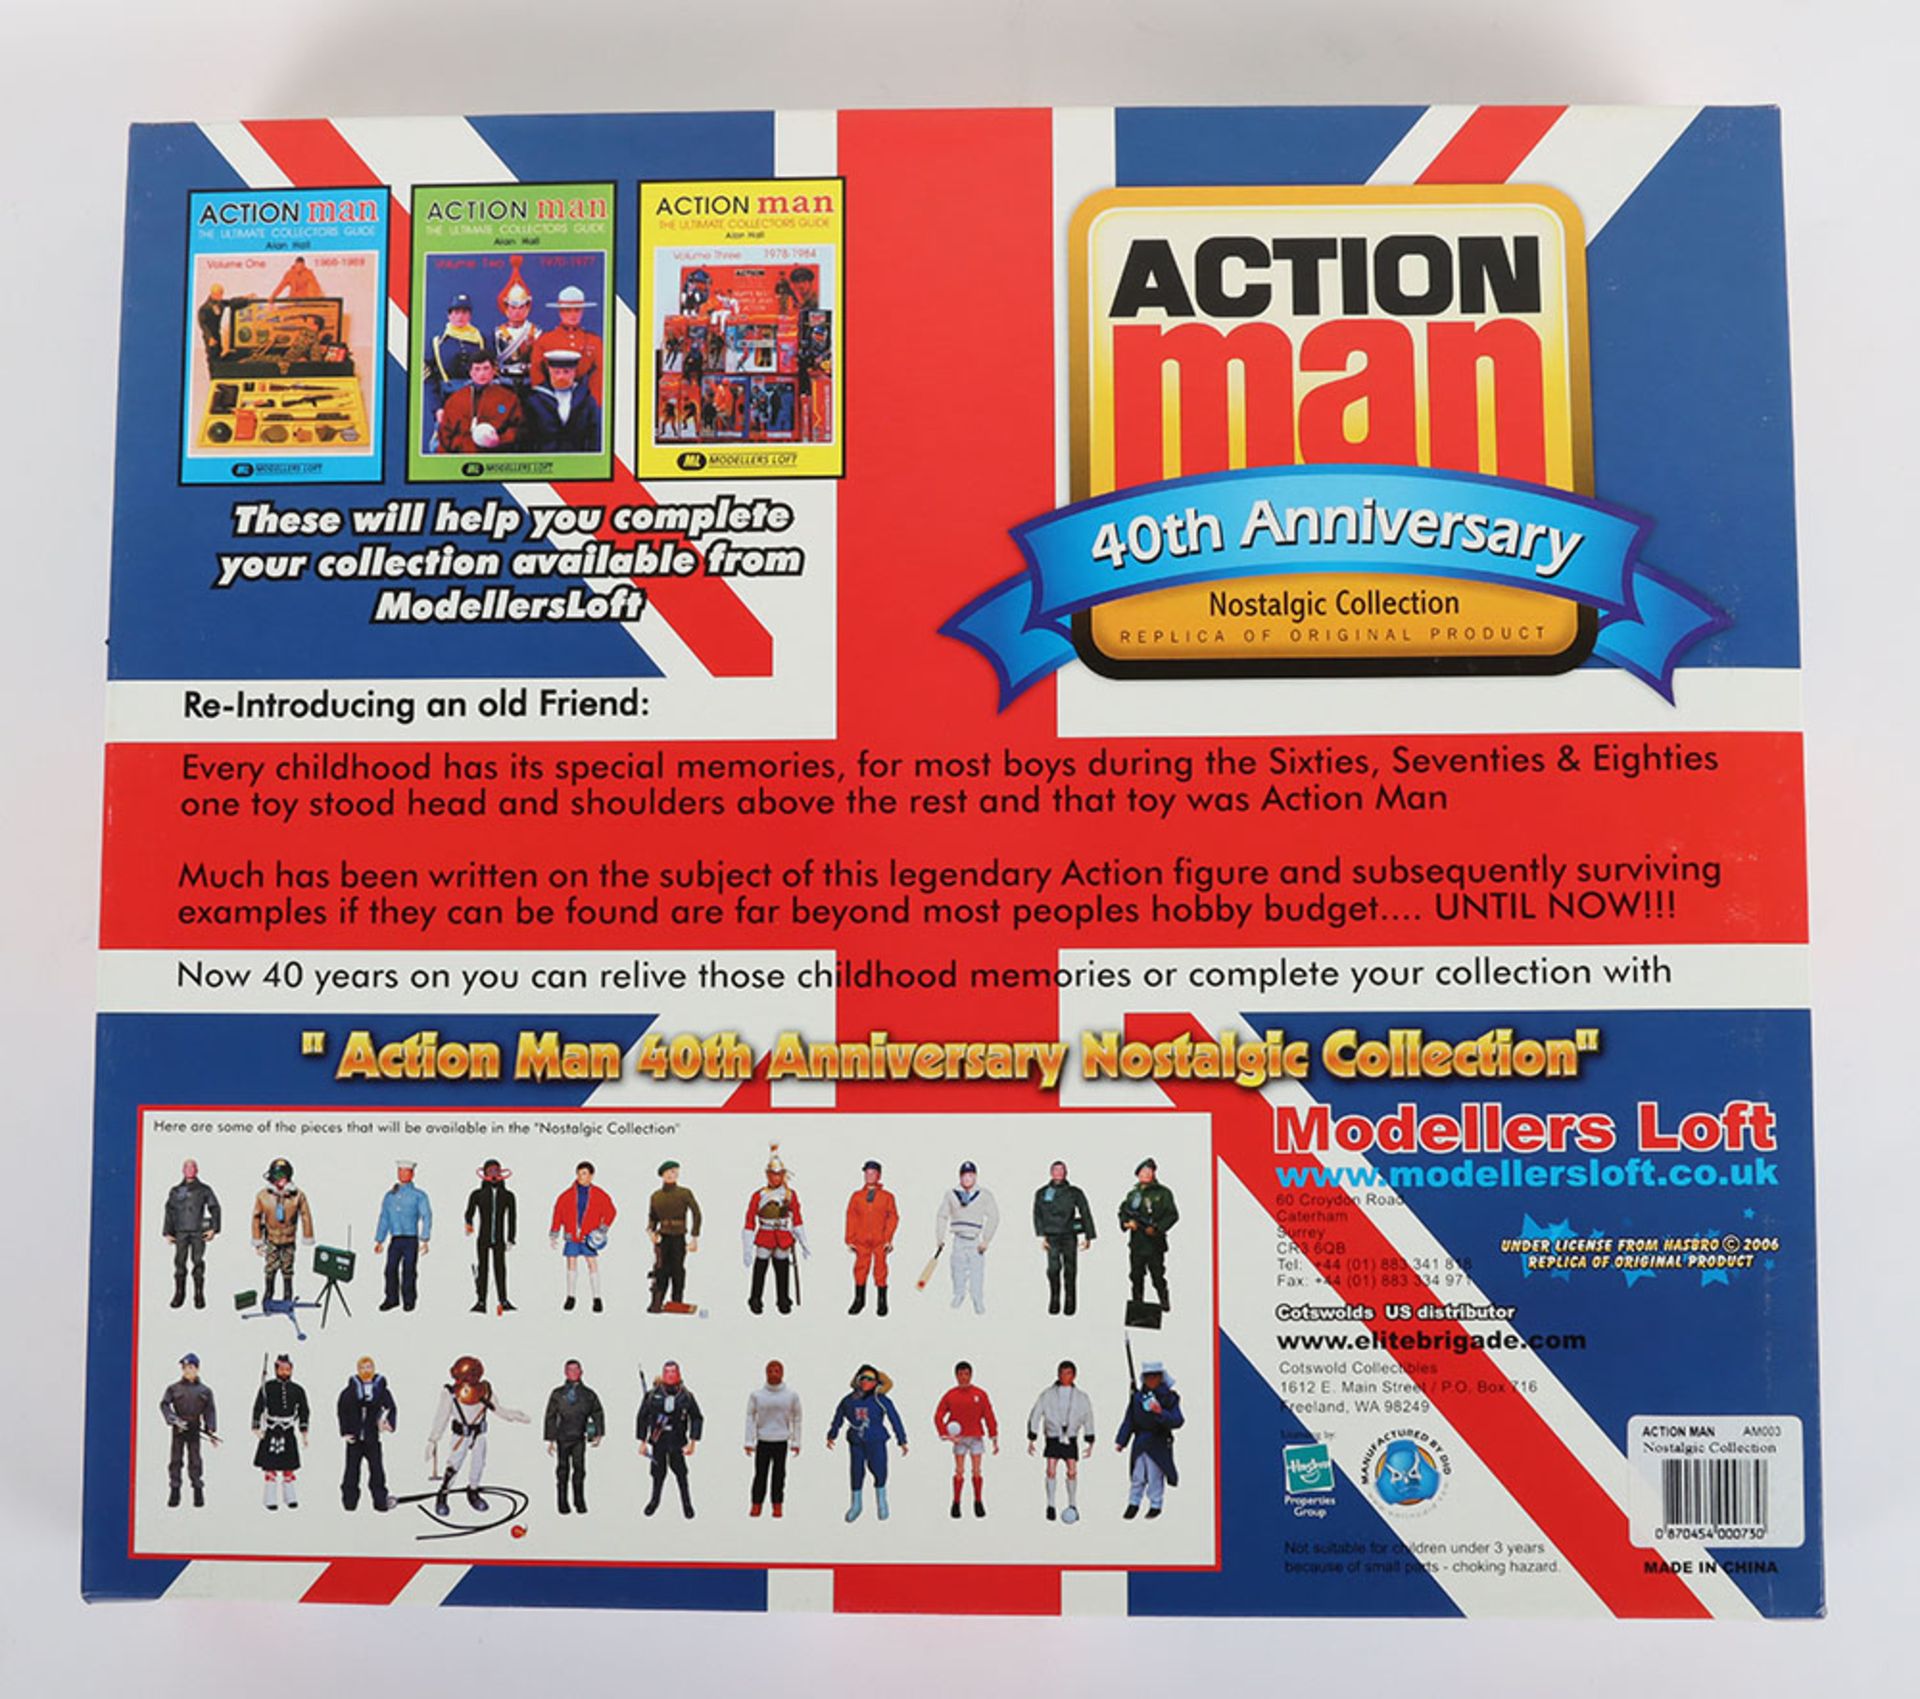 Action Man Palitoy Sportsman Famous Football Clubs Chelsea 40th Anniversary Nostalgic Collection - Image 2 of 4